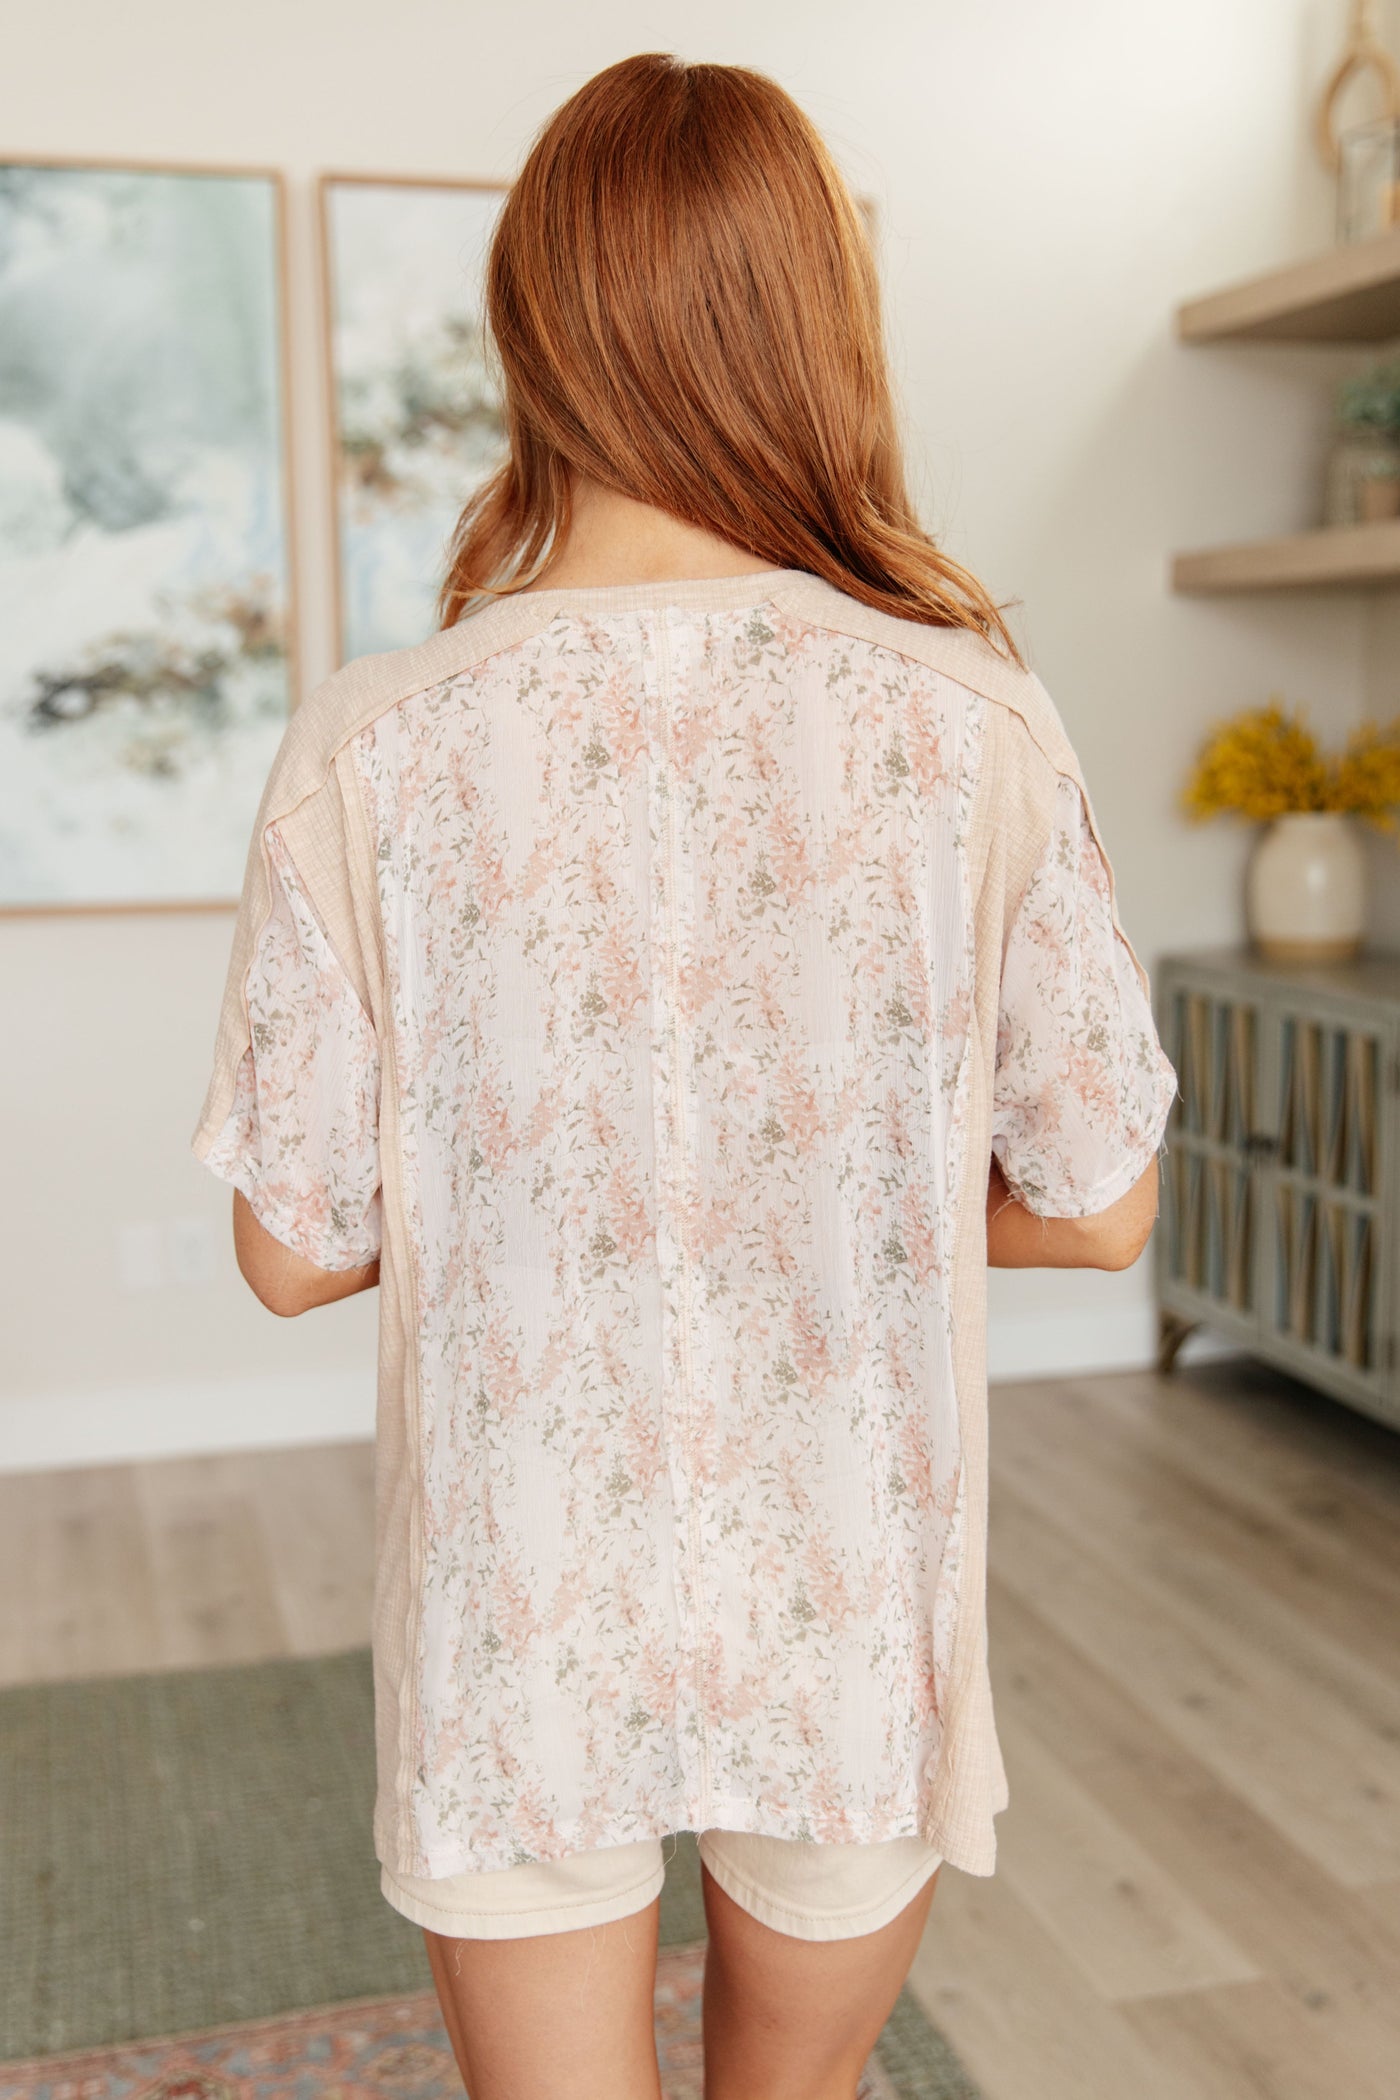 Mention Me Floral Accent Top in Toasted Almond-Tops-Ave Shops-Market Street Nest, Fashionable Clothing, Shoes and Home Décor Located in Mabank, TX